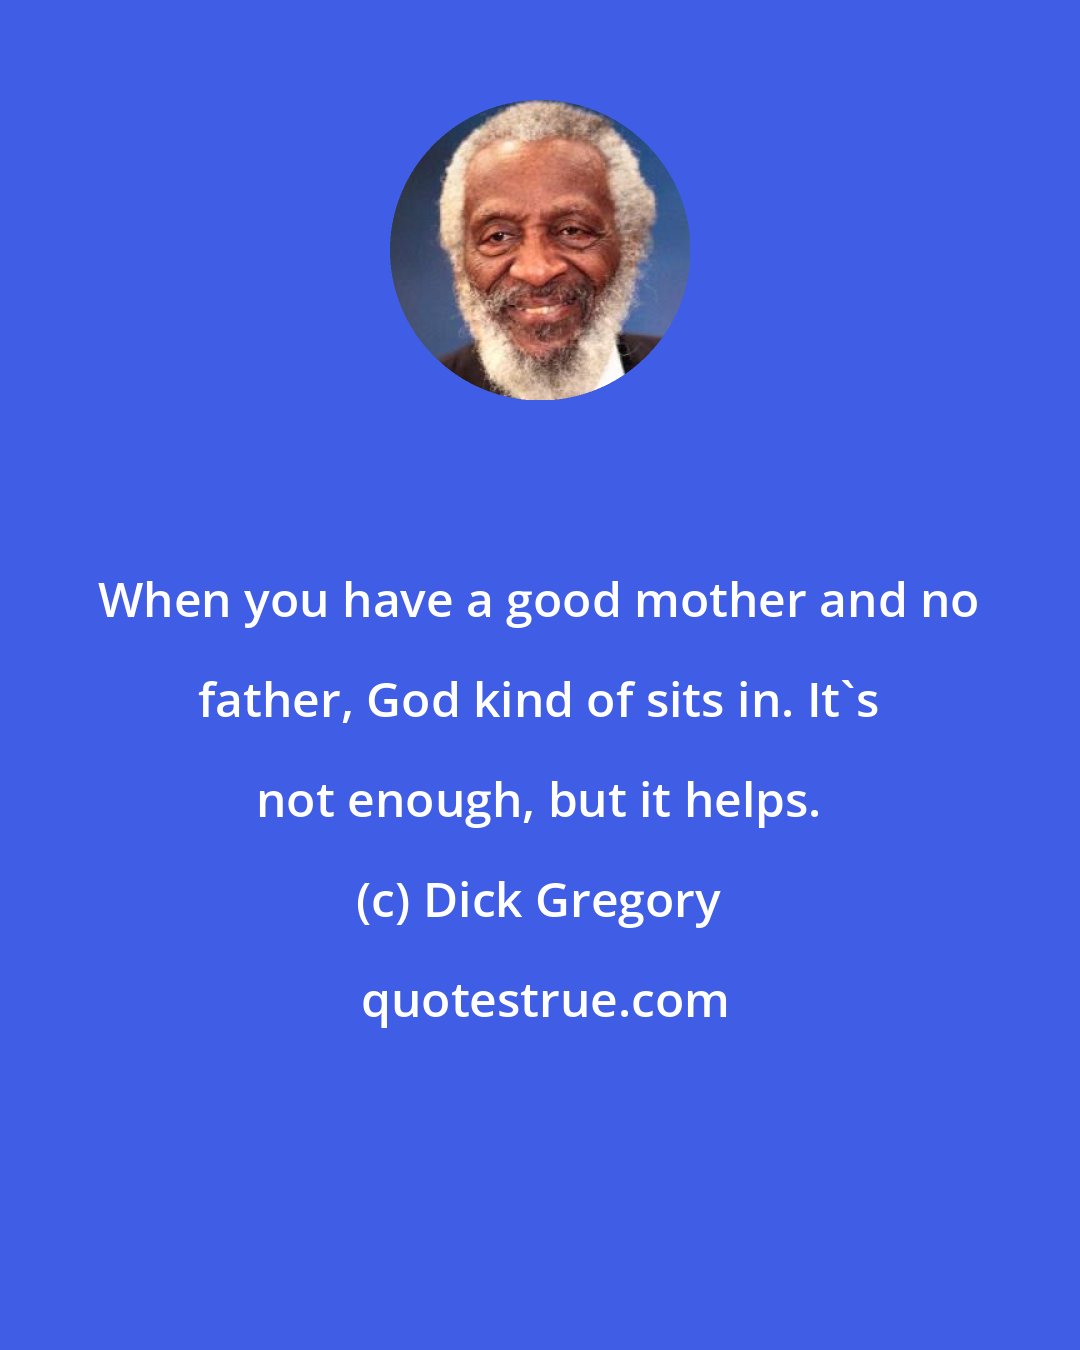 Dick Gregory: When you have a good mother and no father, God kind of sits in. It's not enough, but it helps.